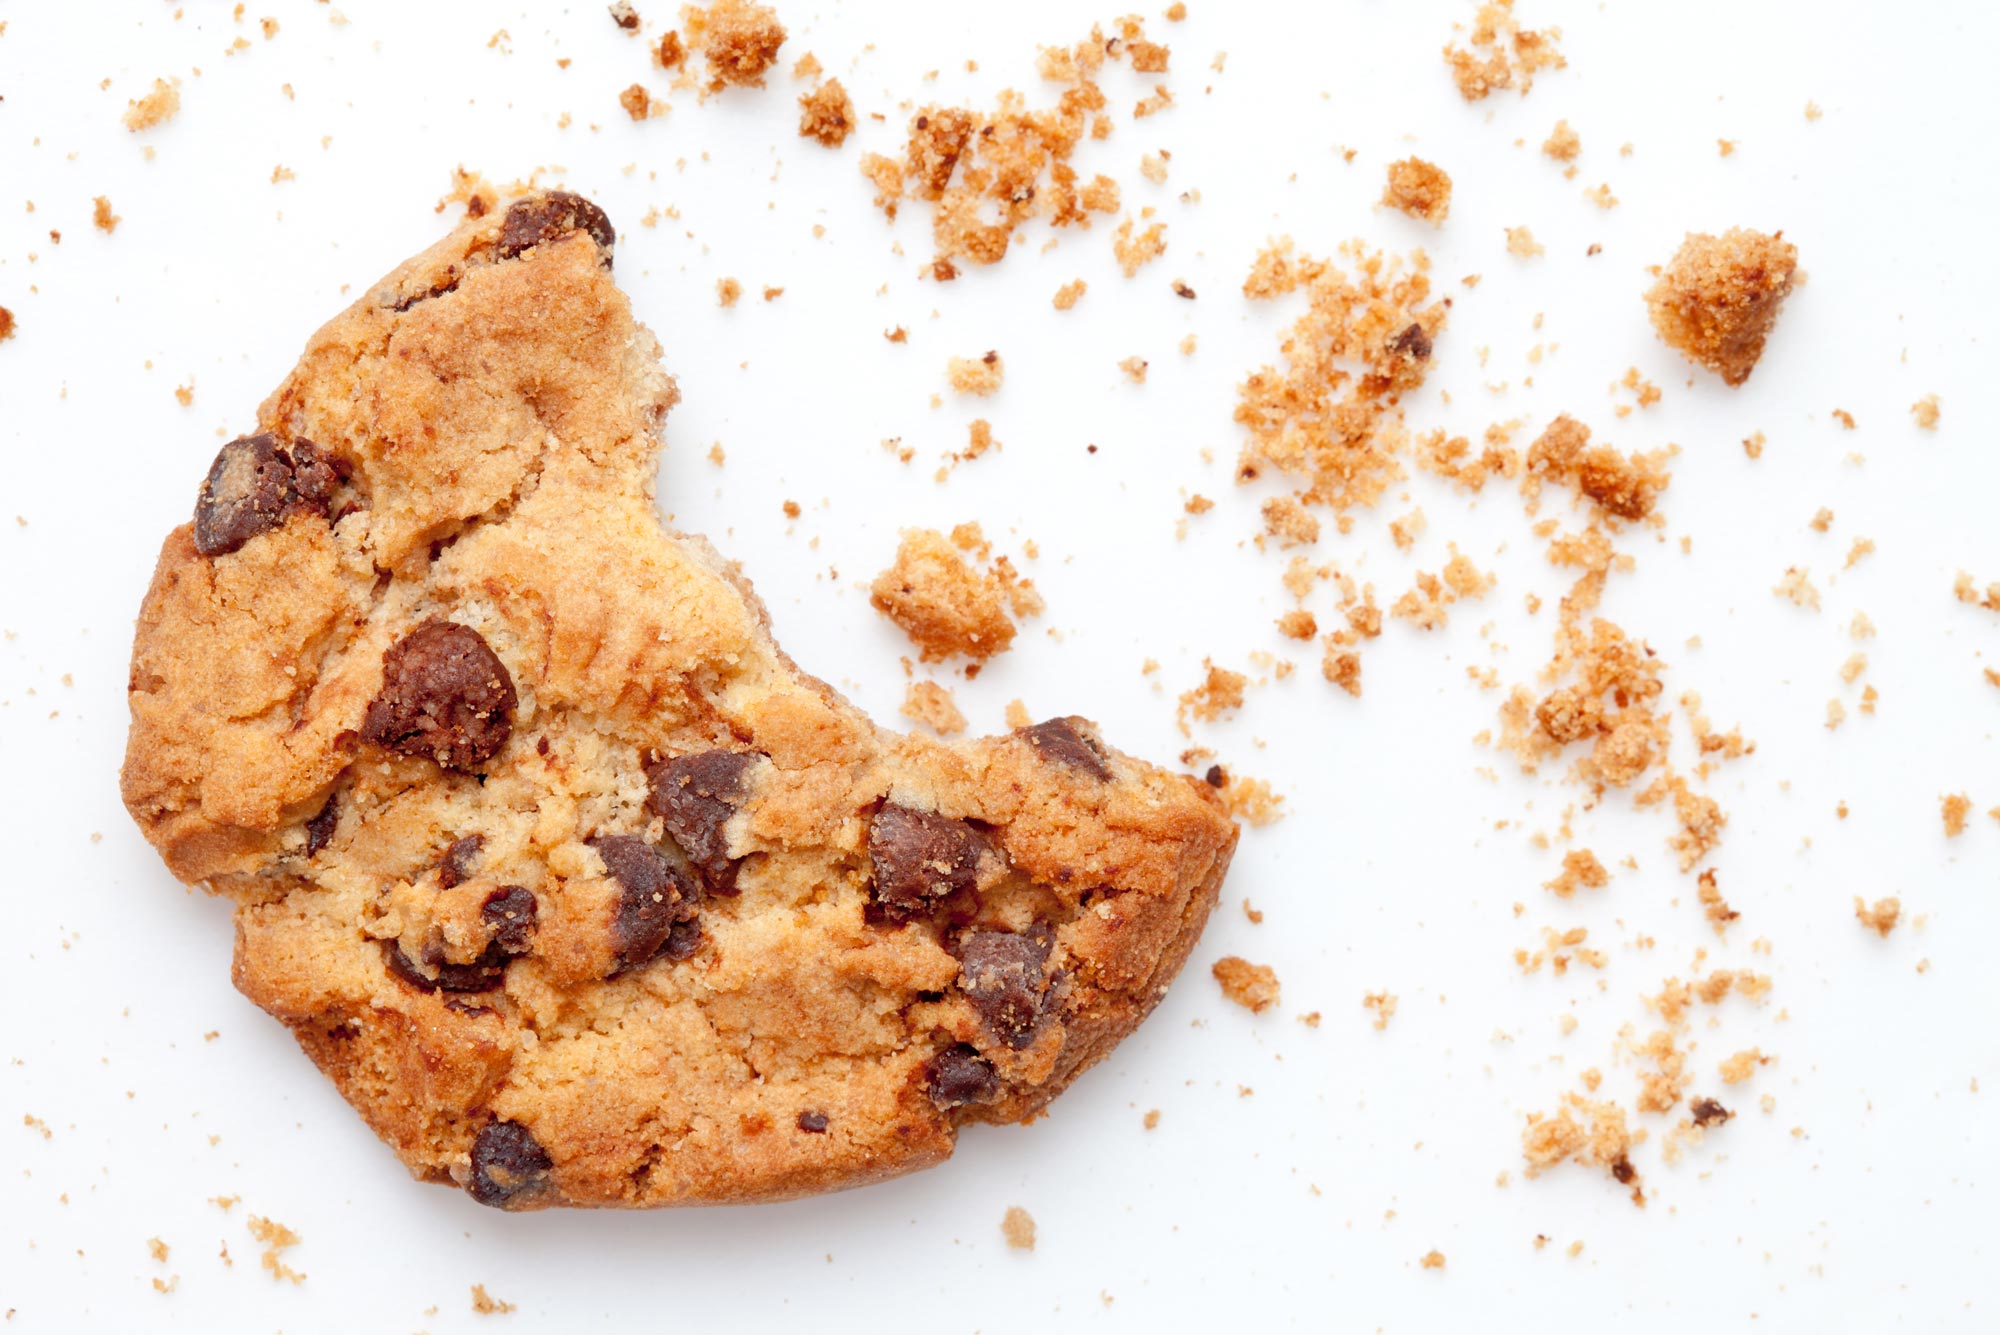 A photo of a cookie with a bite taken out of it and crumbs around it.